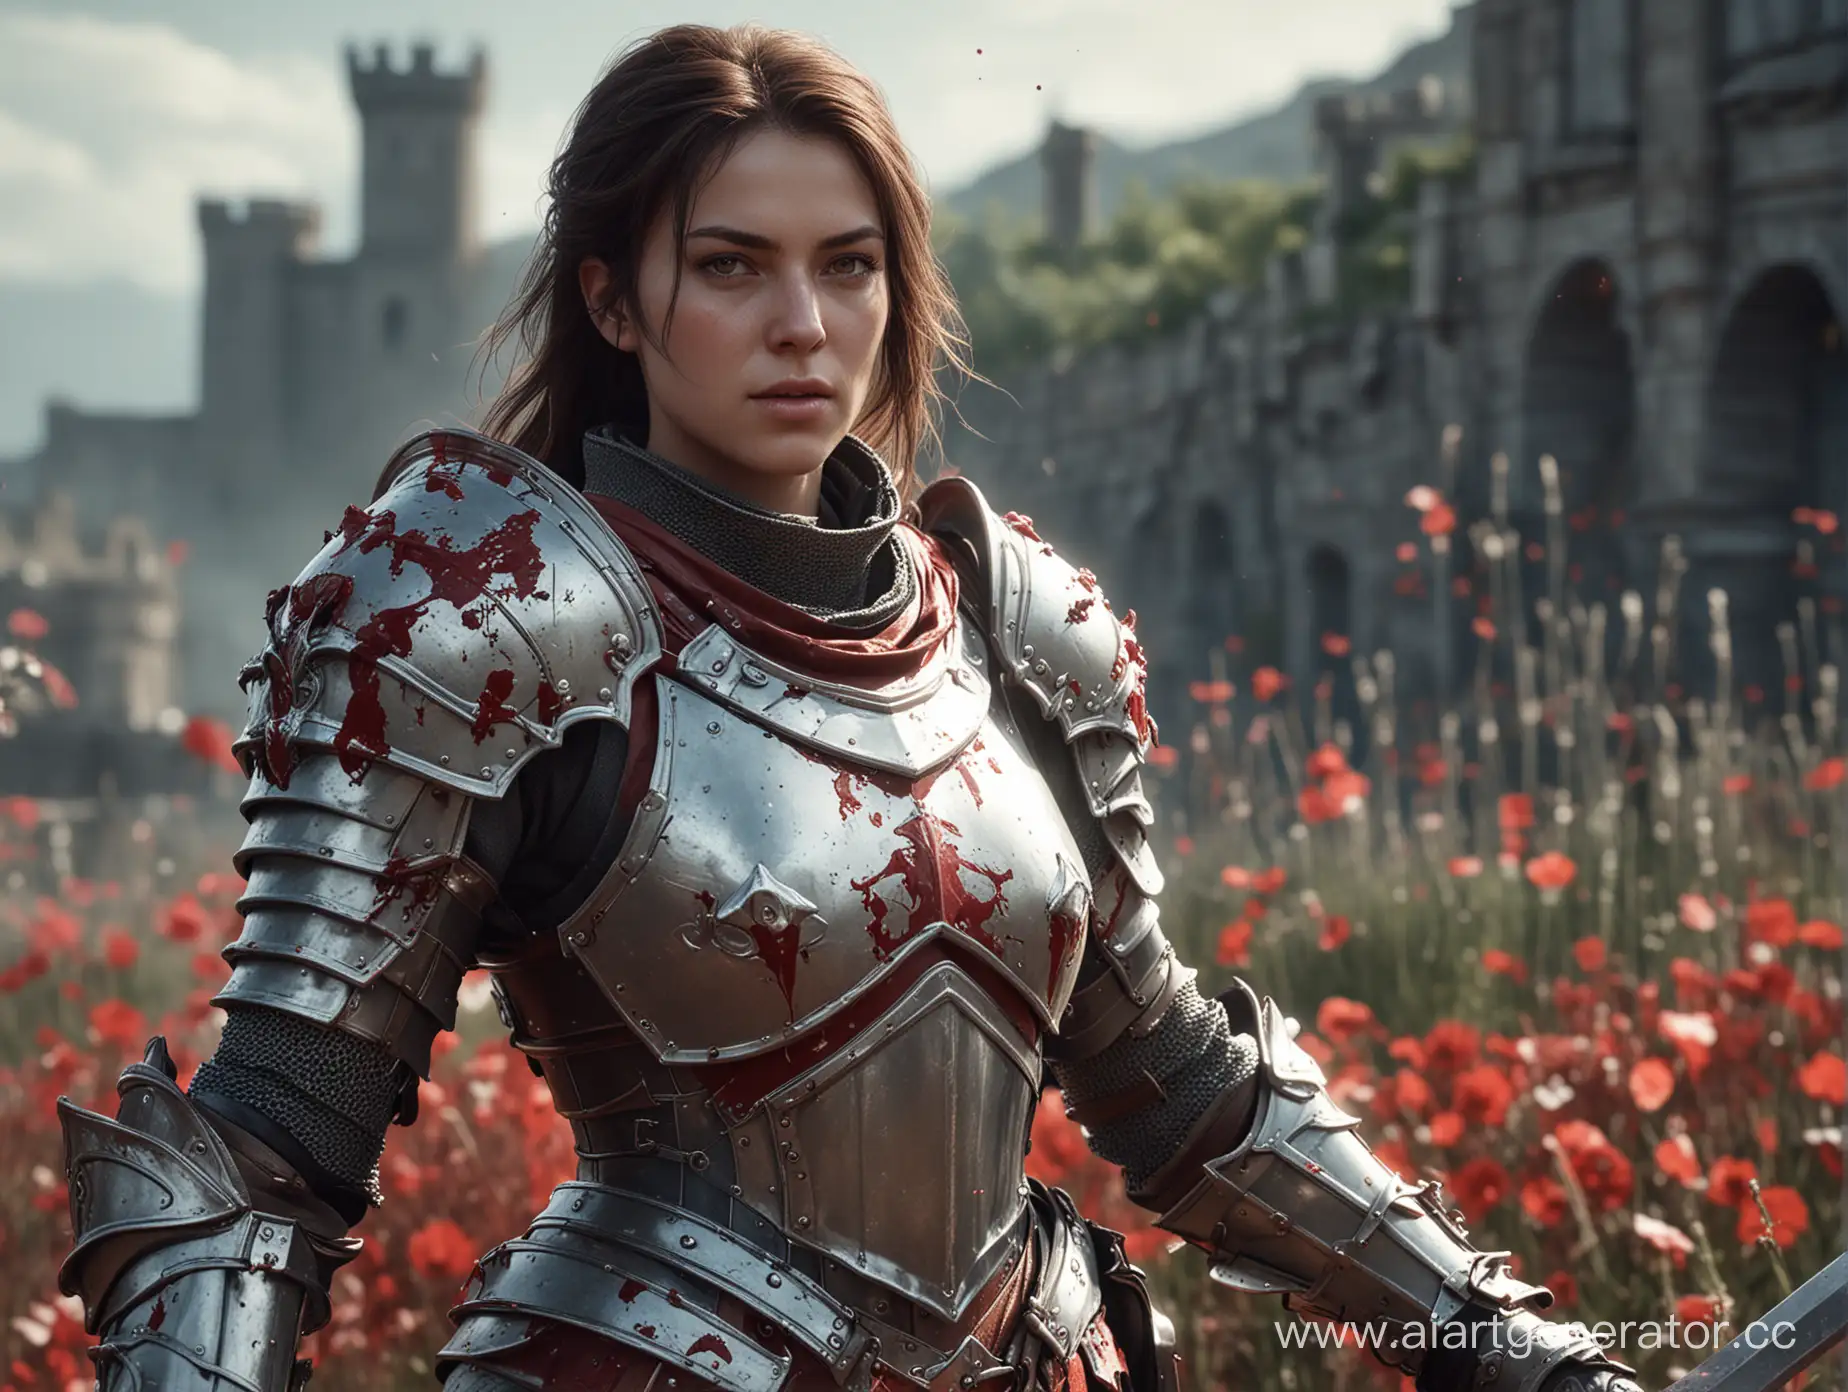 Female knight in blood battlefield, Bloom, ambient occlusion, color contrast, Curves, Levels, Tonemap, Vibrance, DPX, Technicolor, Clarity, Tint, FXAA, SMAA, Depth of field, Vignette, Bloom And Lens Flares, HDR, Film Grain, SSAO